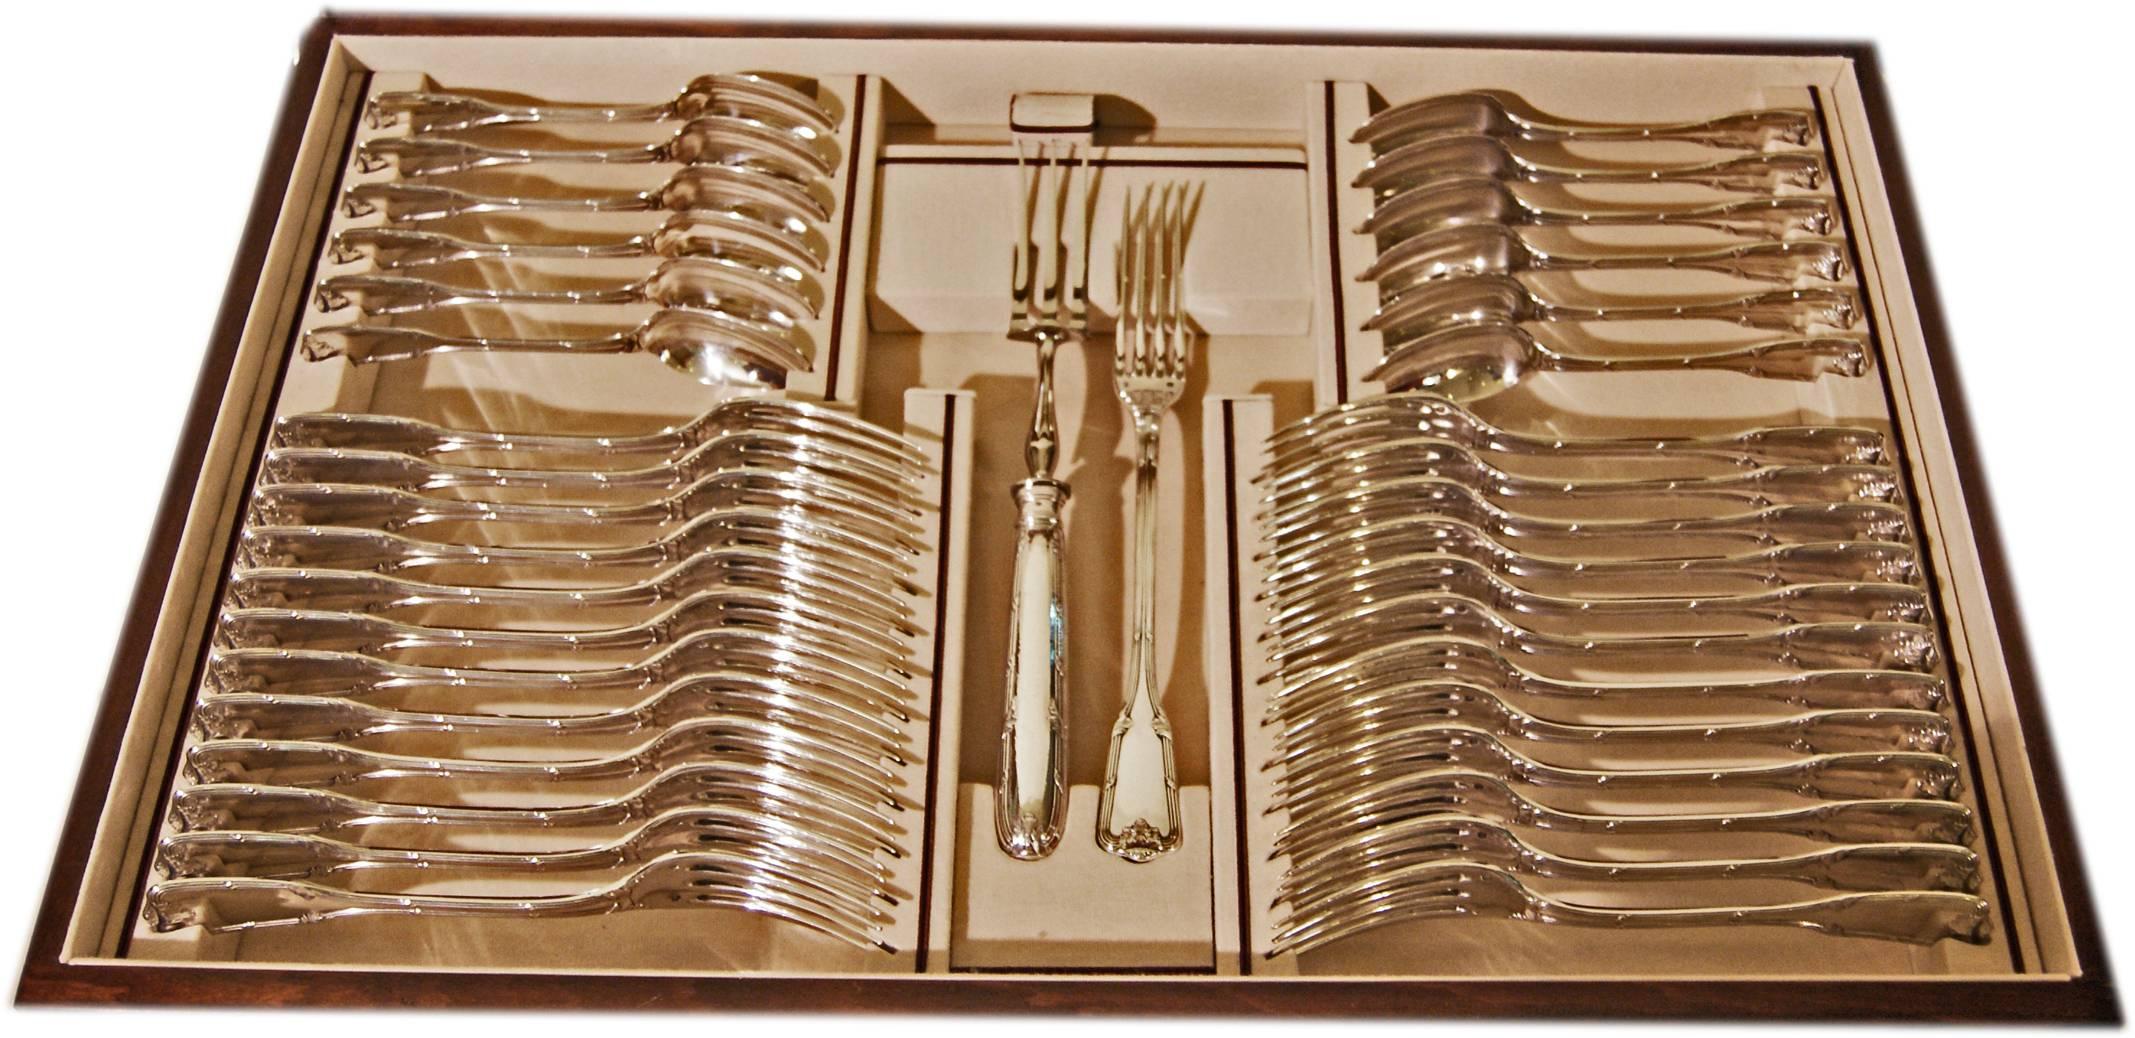 Early 20th Century SILVER FINEST 168-PIECE FLATWARE CUTLERY 24 PERSONS P.-F.QUEILLÉ FRANCE c.1900